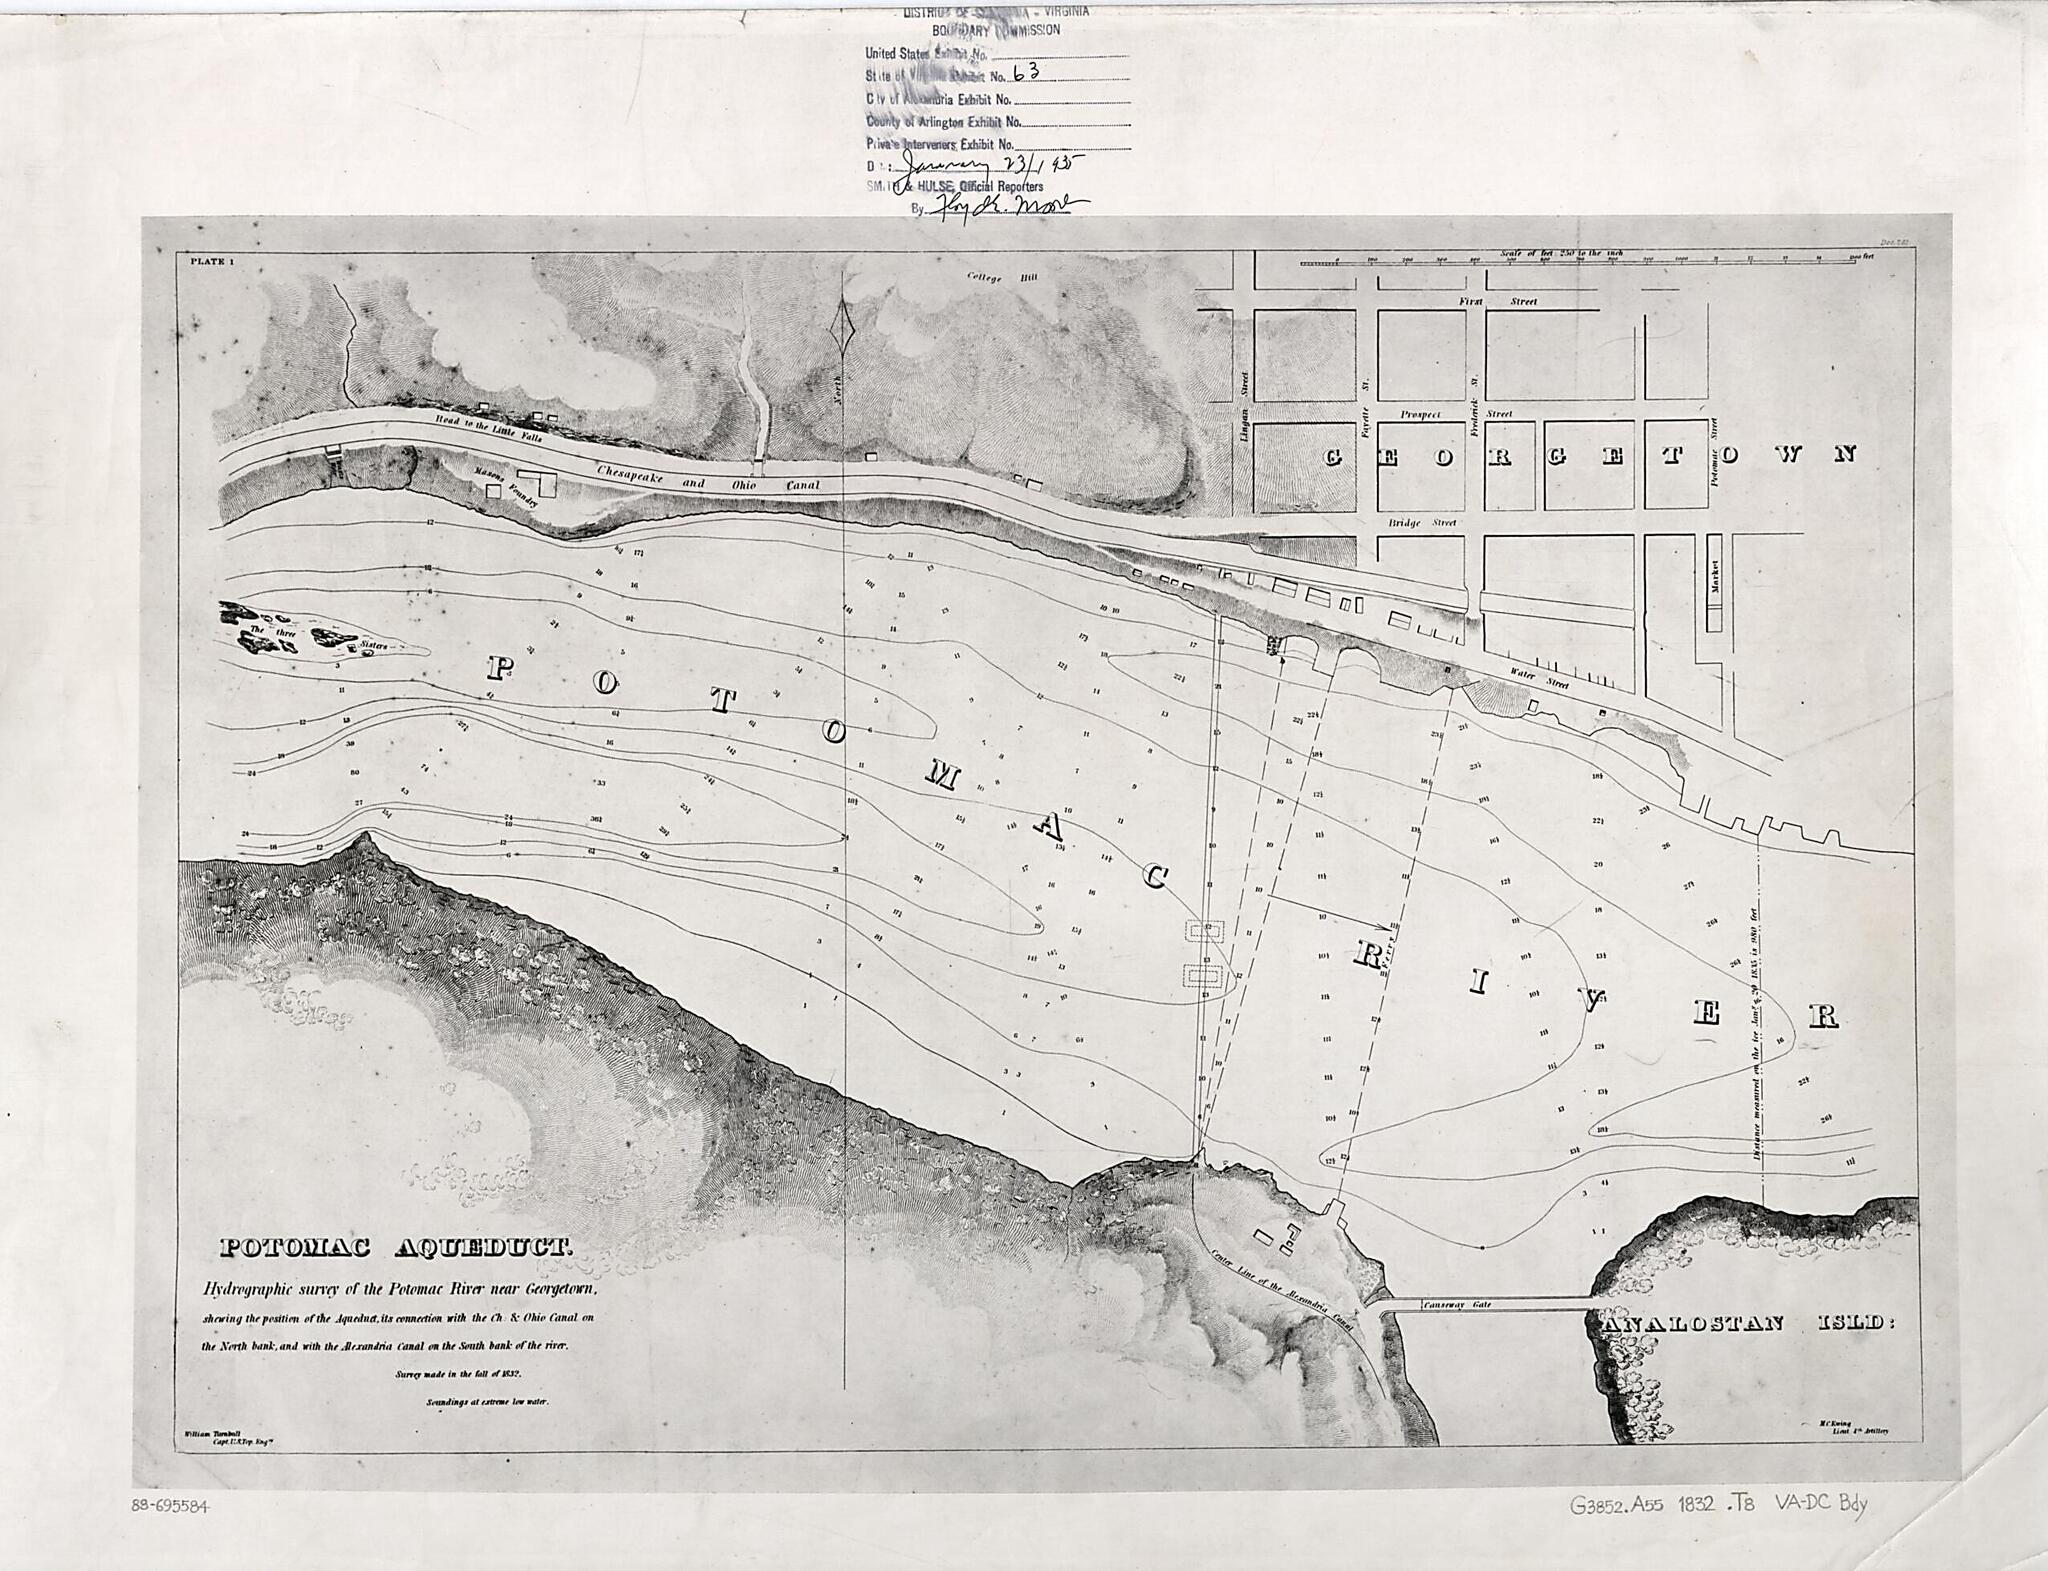 This old map of Potomac Aqueduct, Hydrographic Survey of the Potomac River Near Georgetown : Shewing the Position of the Aqueduct, Its Connection With the Ch. &amp; Ohio Canal On the North Bank, and With the Alexandria Canal On the South Bank of the River fr